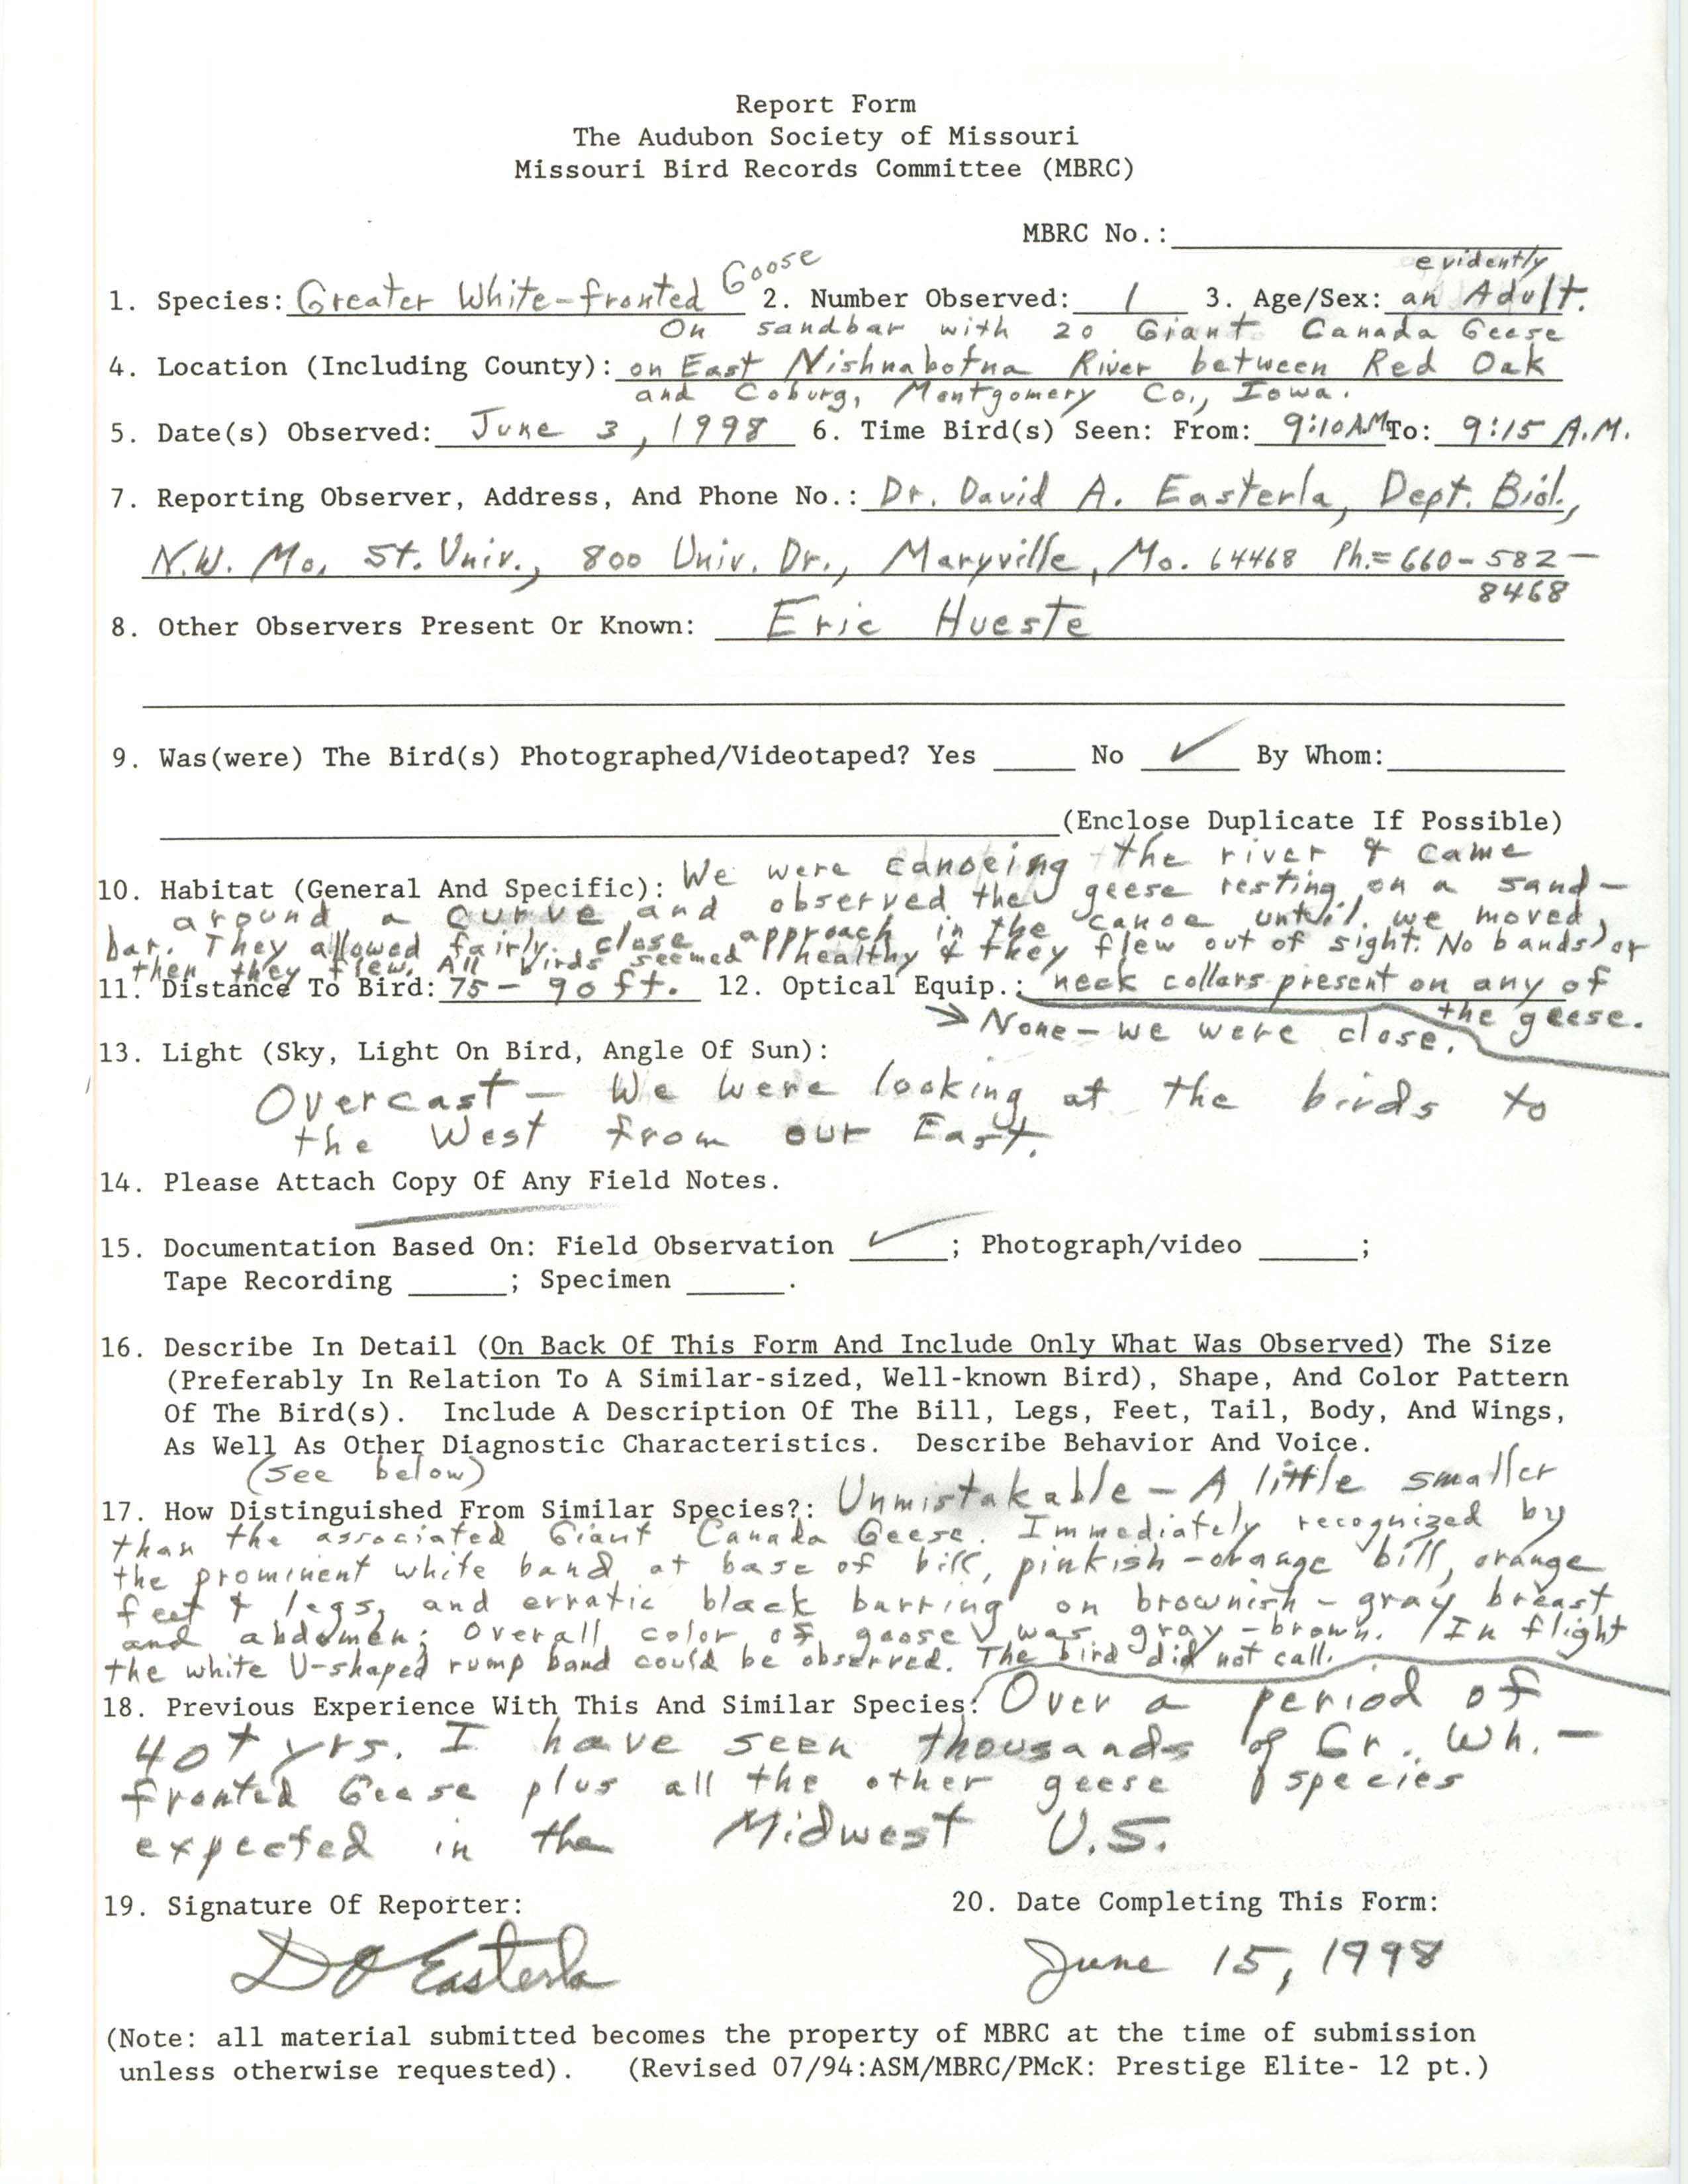 Report form, Greater White-fronted Goose, June 3, 1998, David Easterla